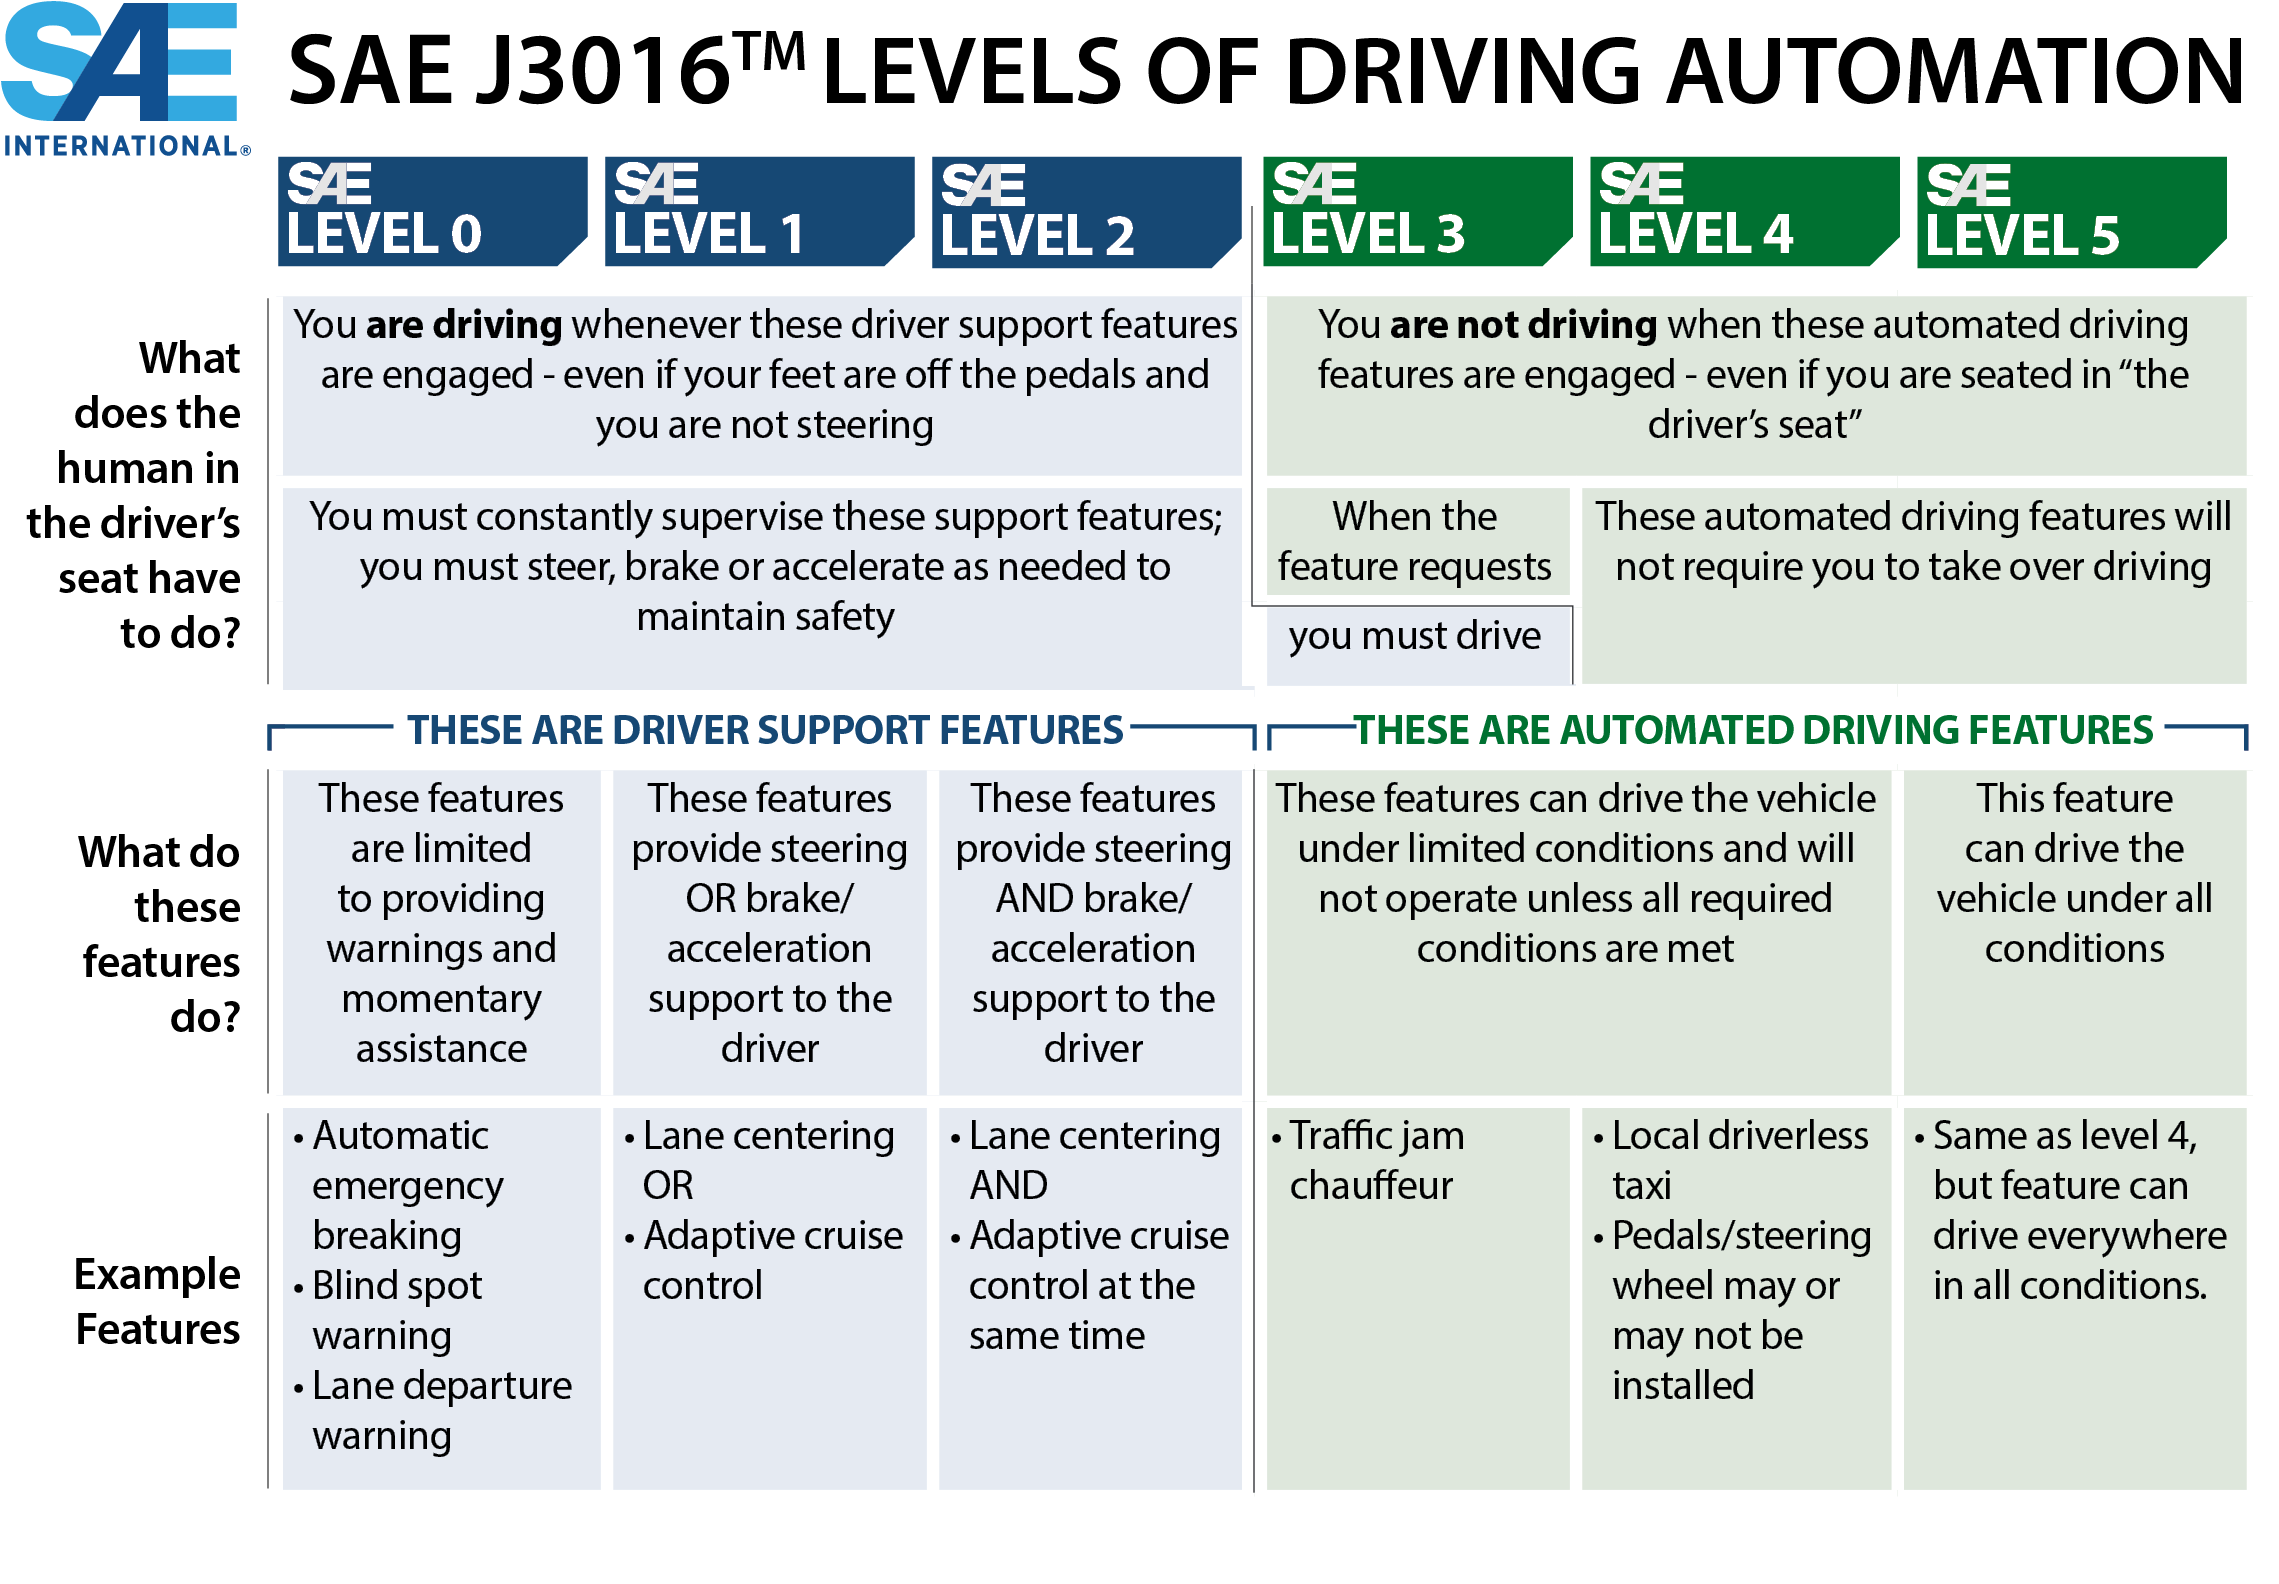 SAE J3016(TM) Levels of Driving Automation.